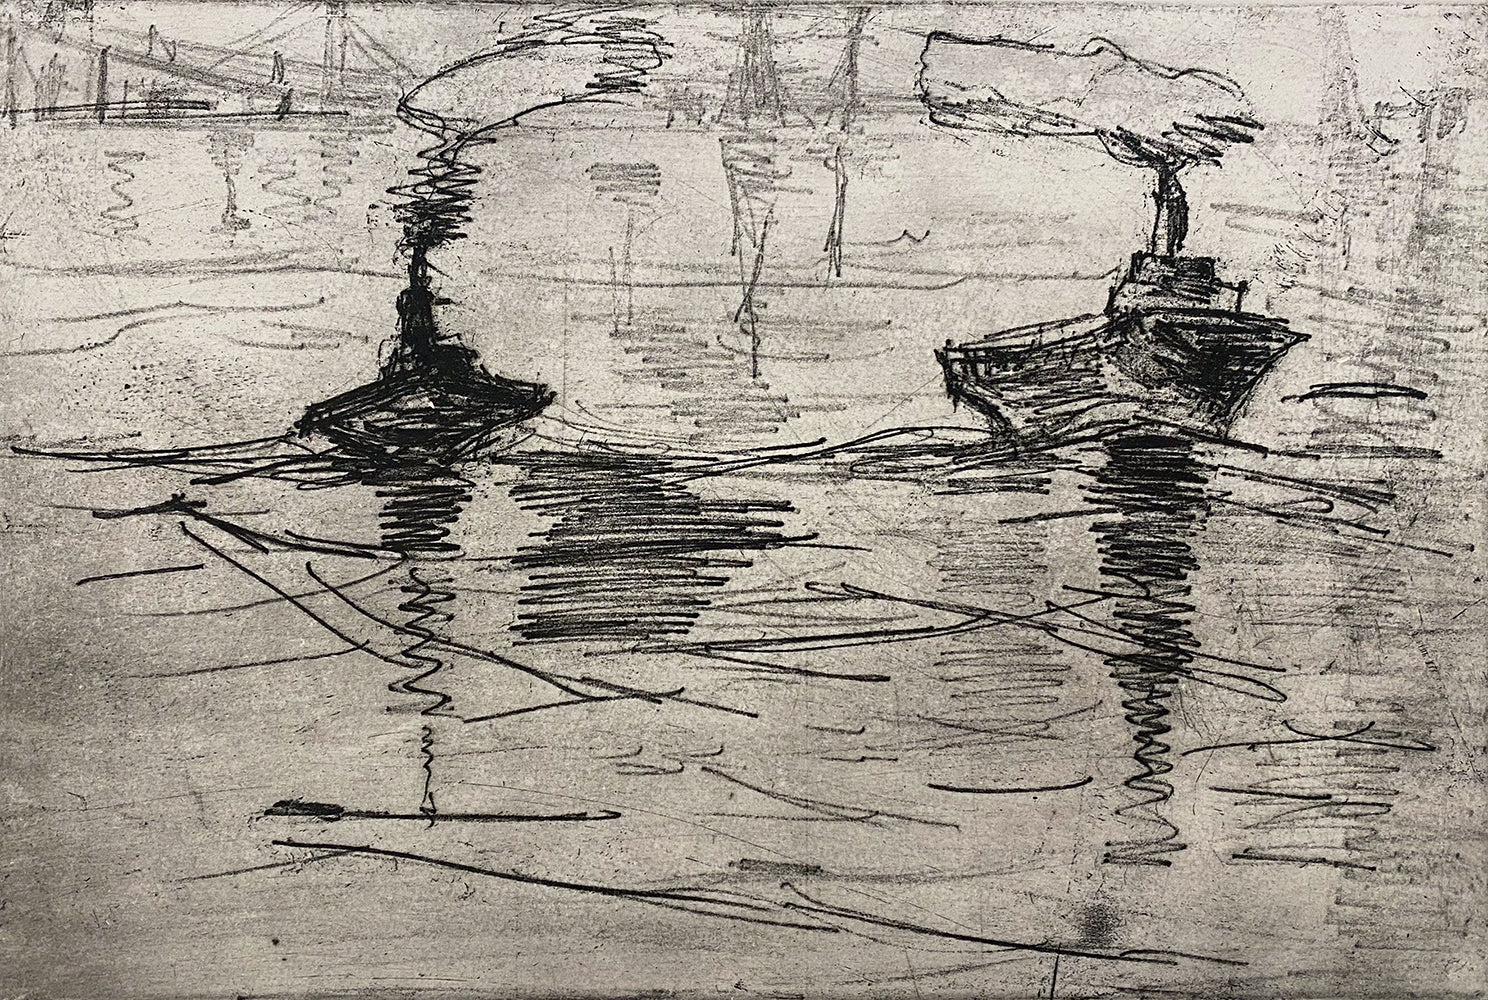 Louise Donovan - Two Boats on the River